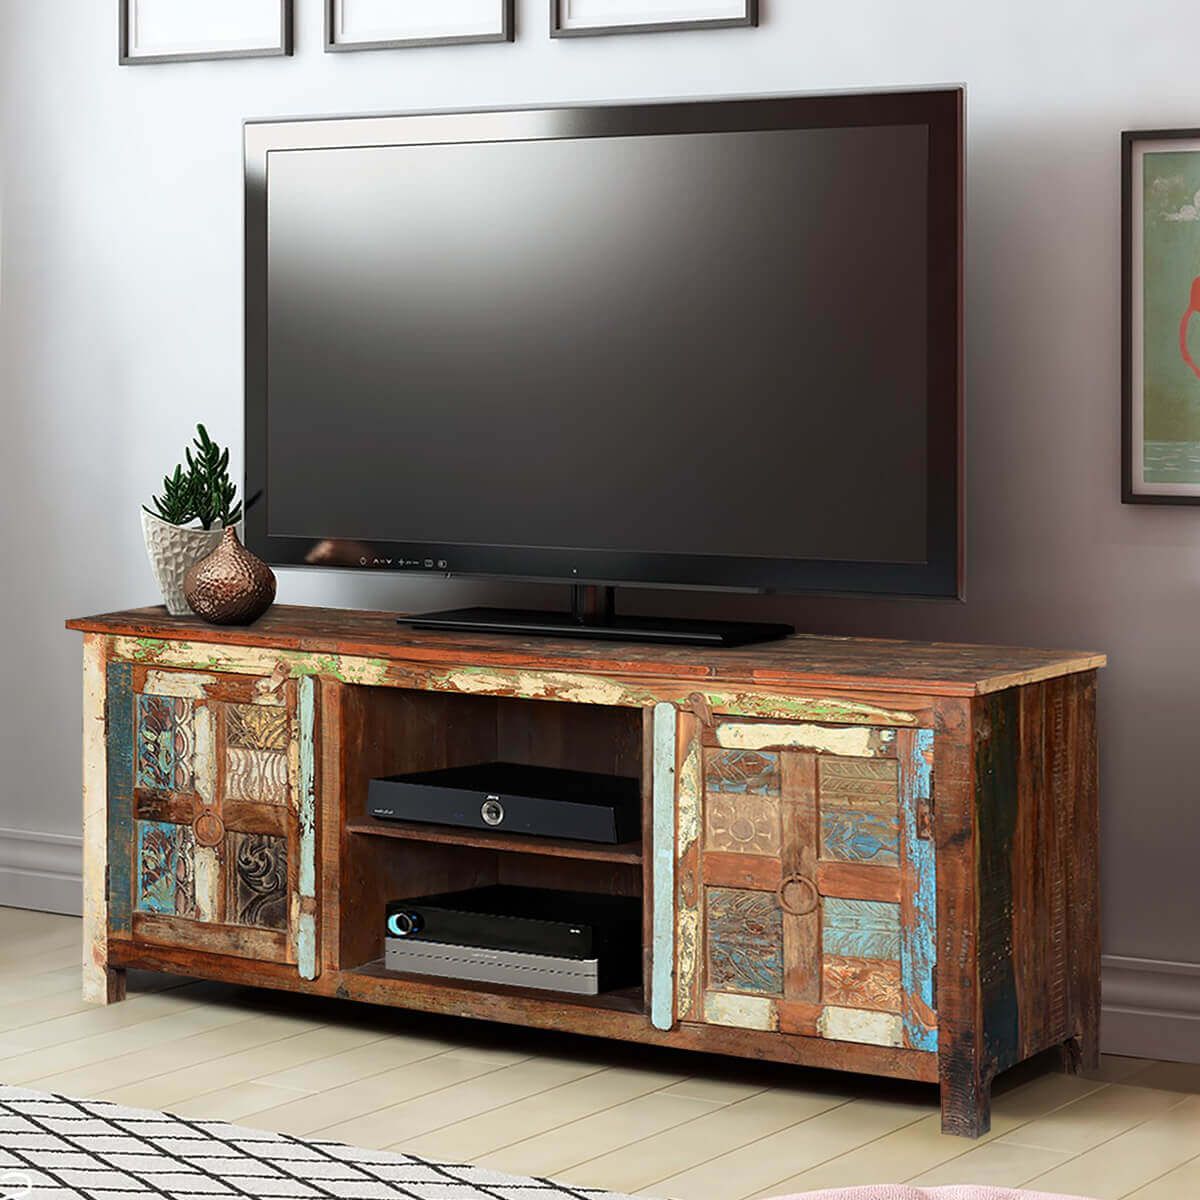 Frontier Rustic Hand Carved Reclaimed Wood Tv Console Intended For Rustic Wood Tv Cabinets (View 15 of 15)